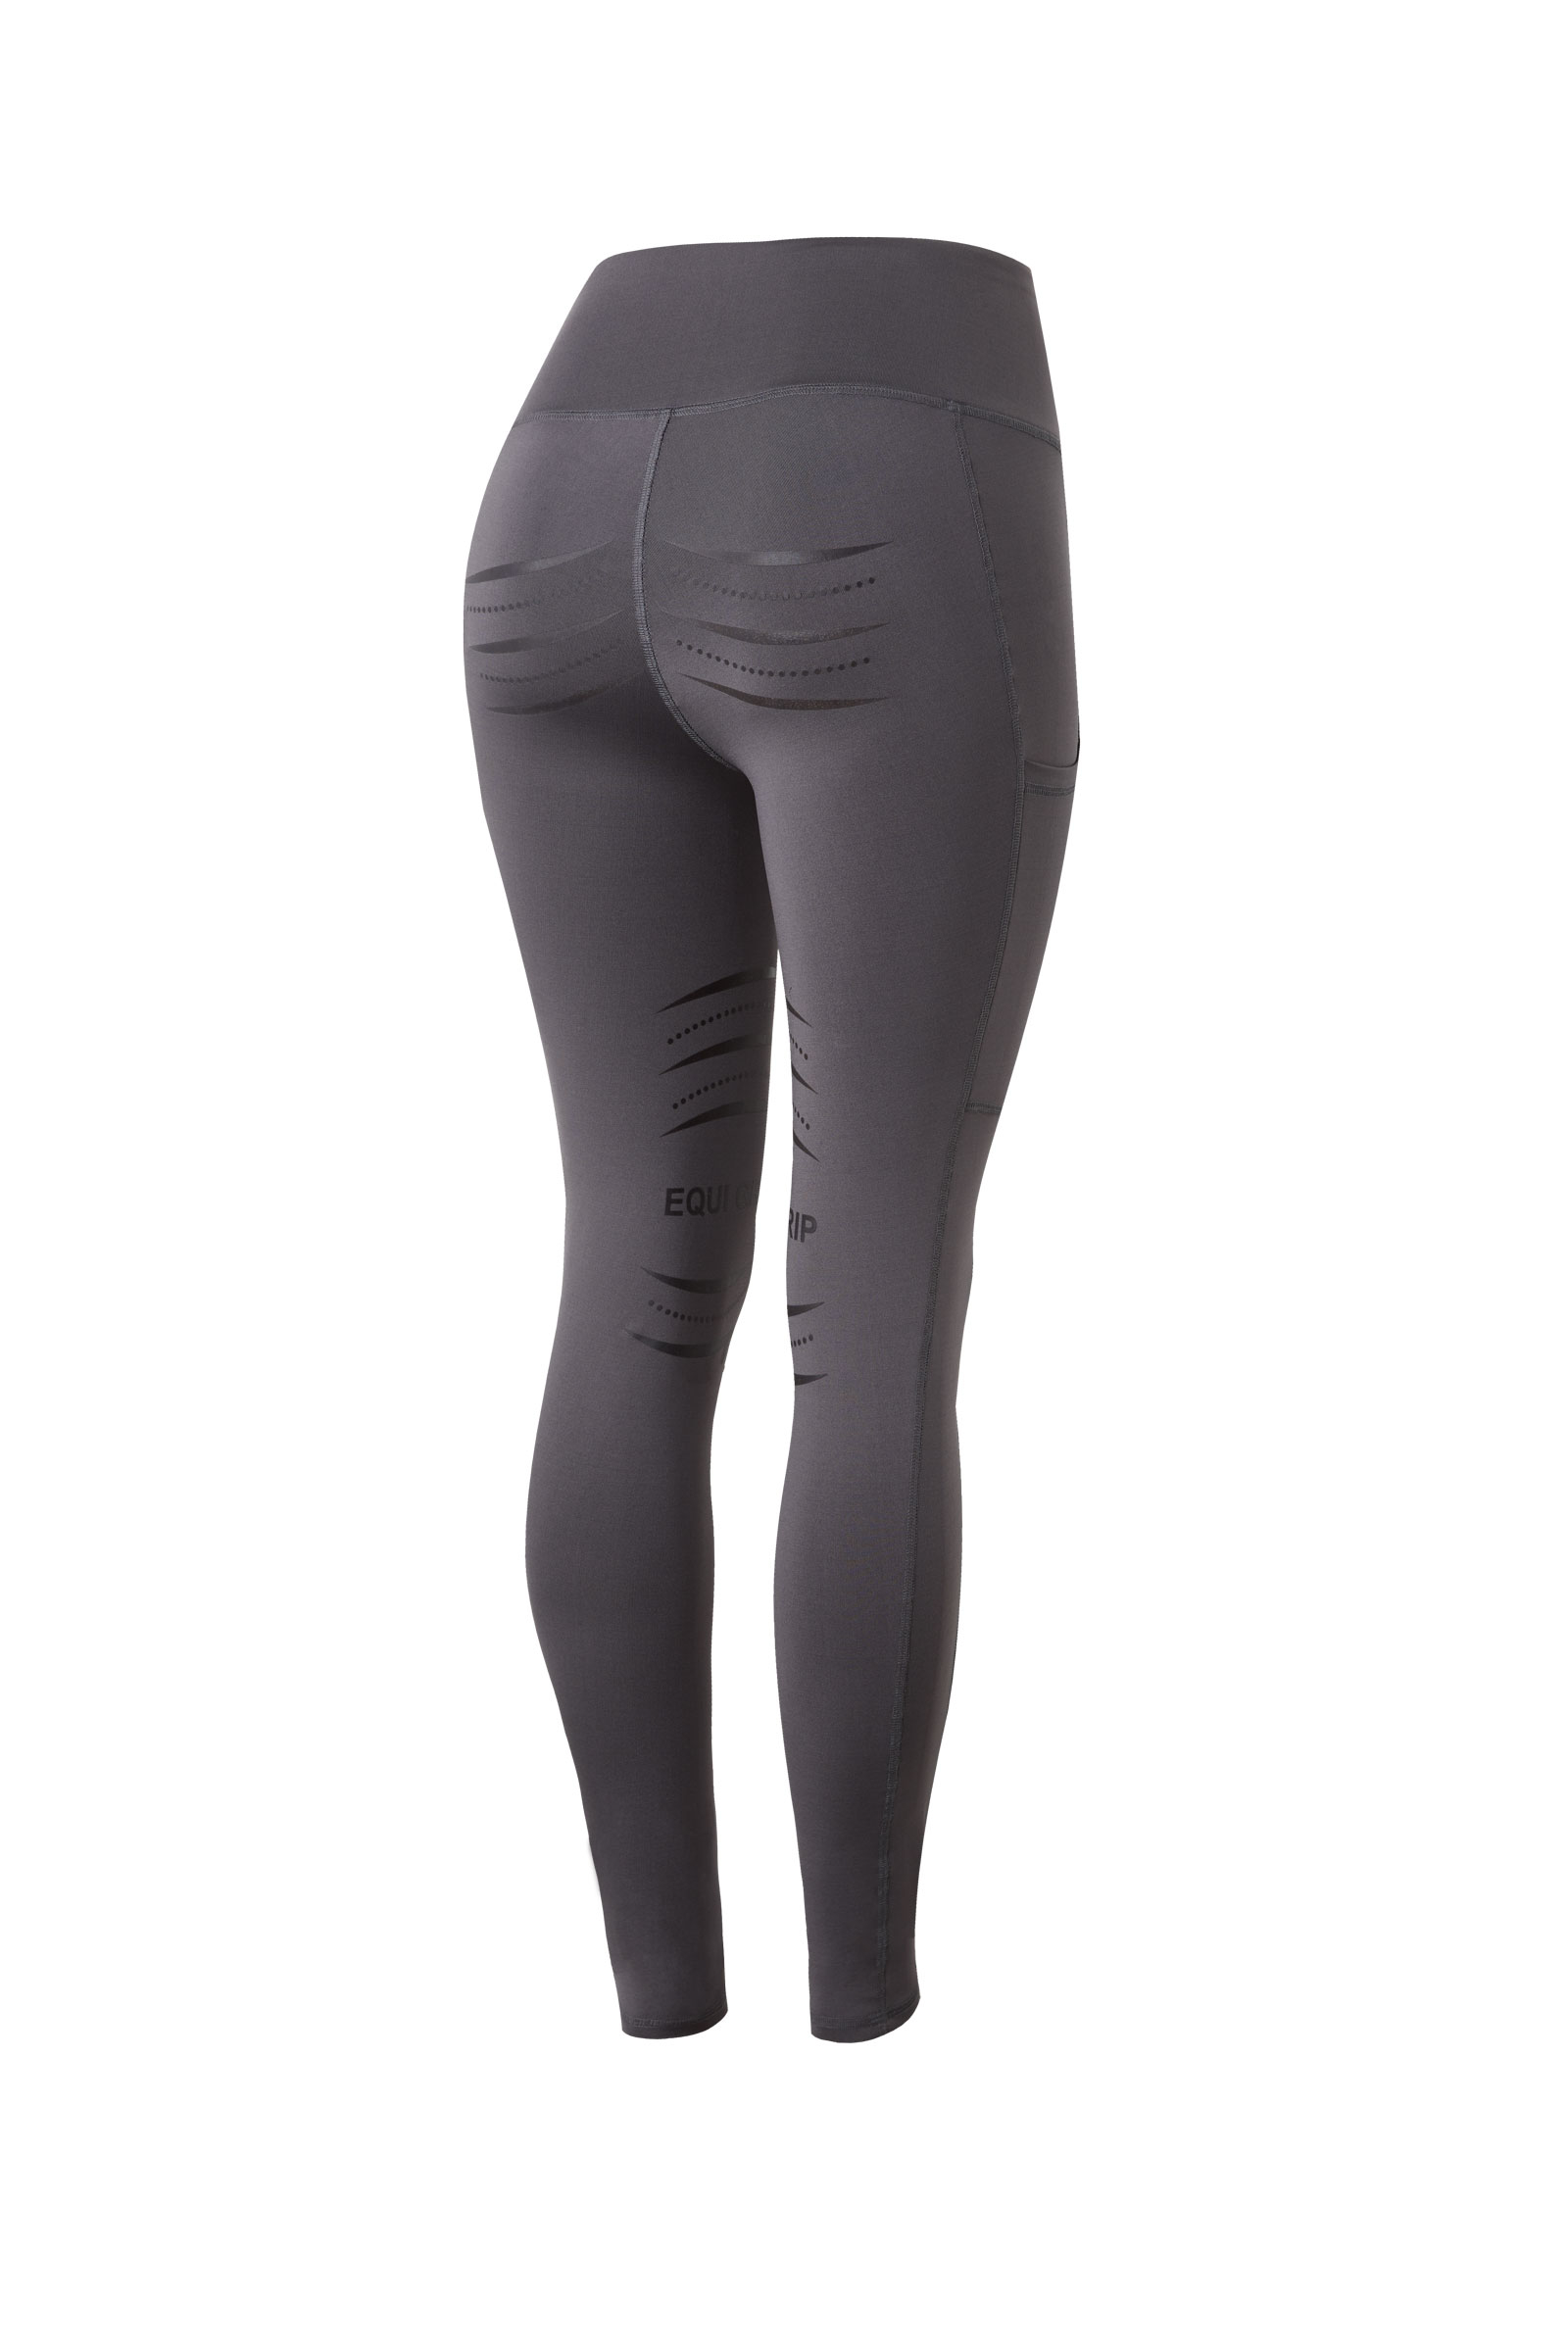 Horze Active Womens Winter Full Seat Tights w/ Phone Pockets